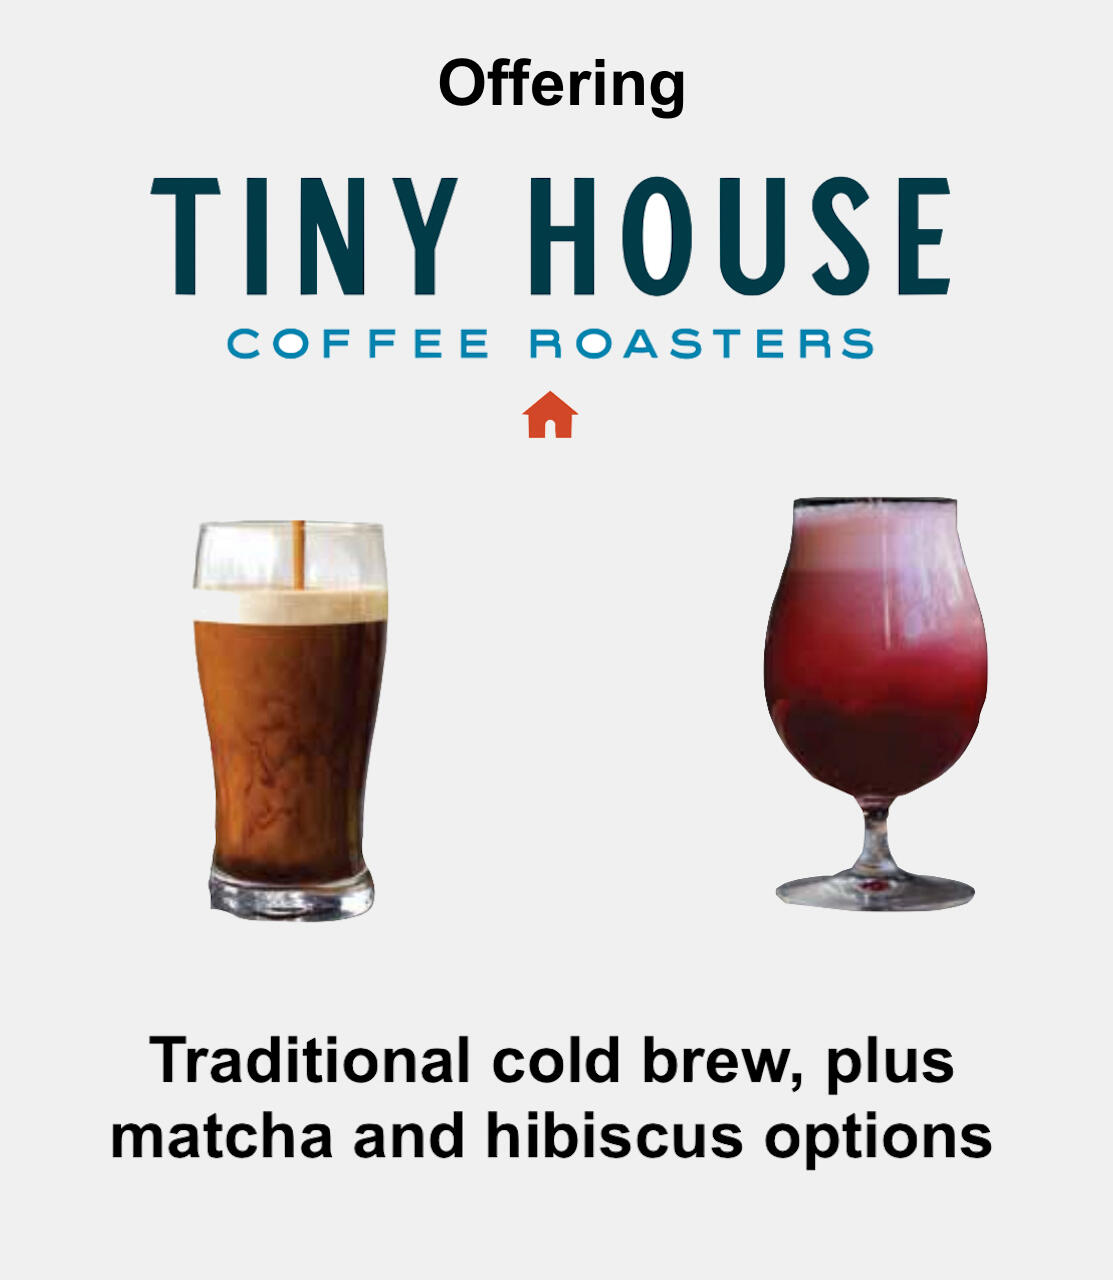 Offering Tiny House Coffee Roasters - traditional cold brew, plus matcha and hibiscus options. The image shows a glass of cold brew coffee next to a glass of hibiscus or berry-infused cold brew, with the Tiny House Coffee Roasters logo above.